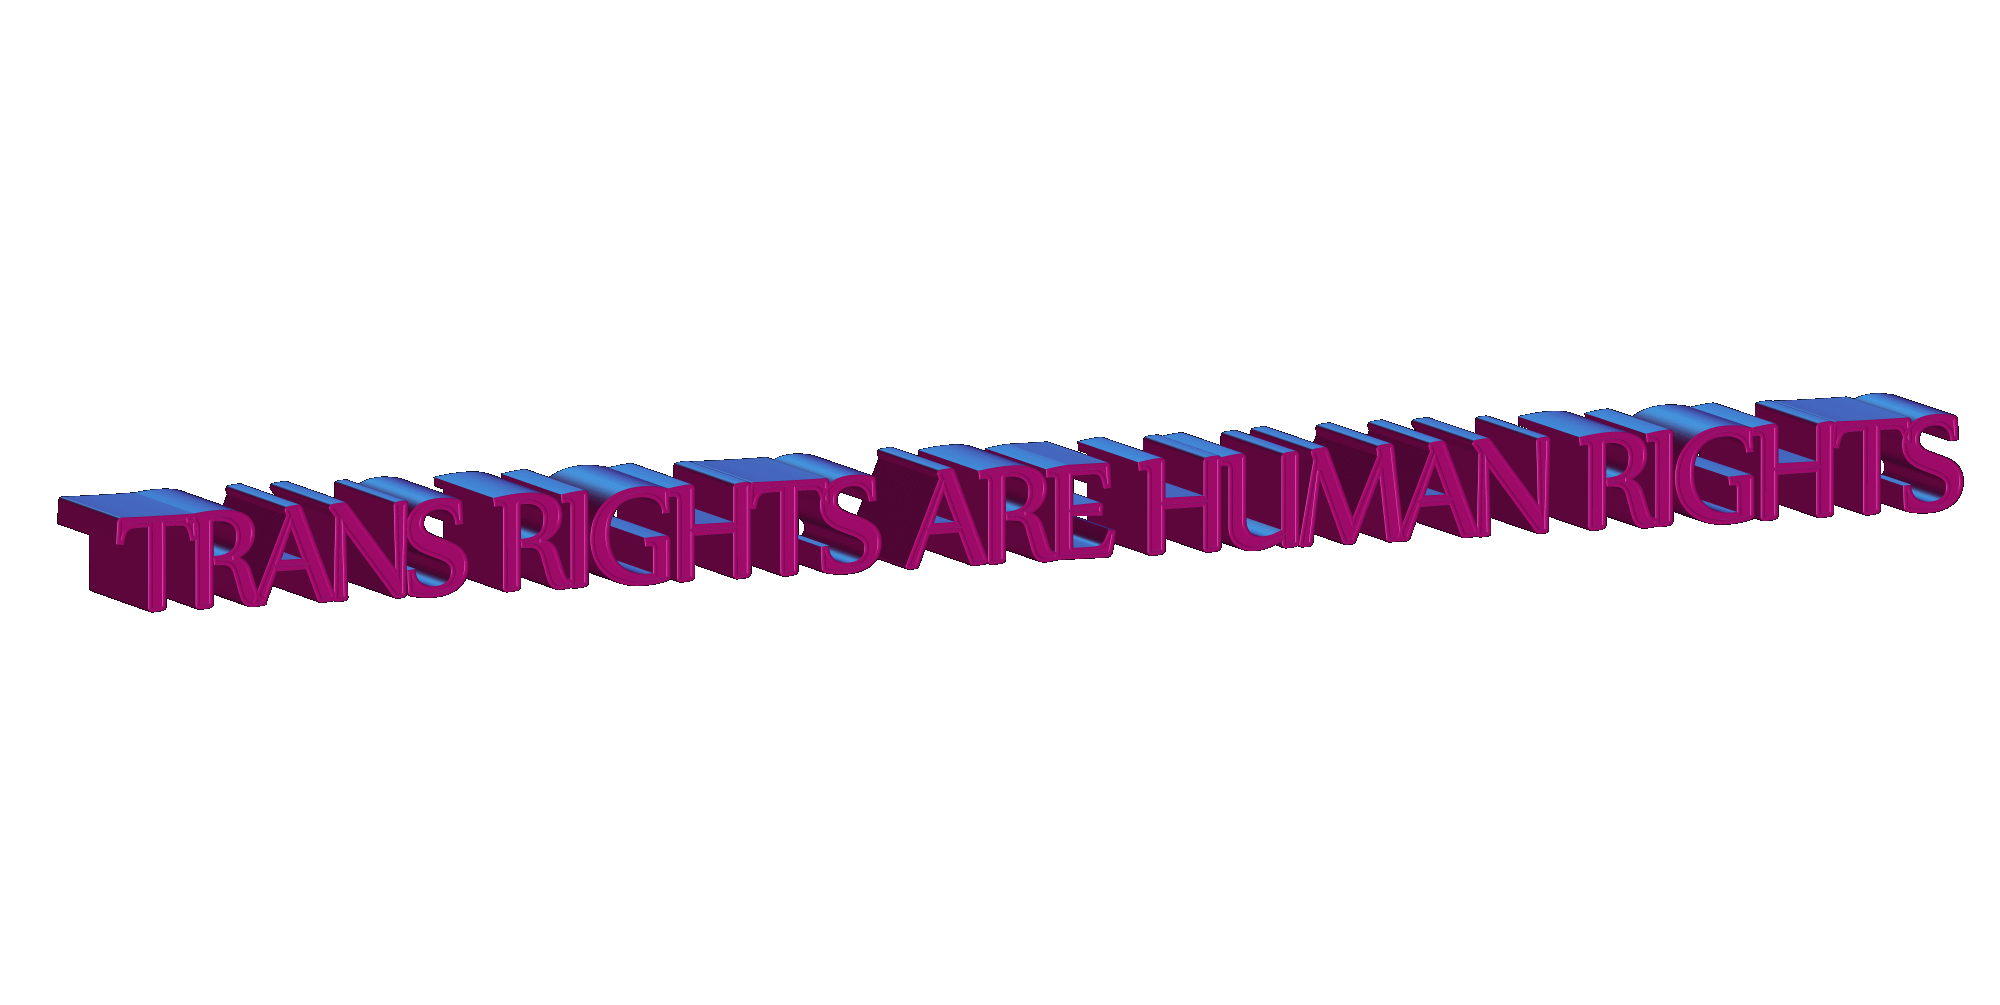 TRANS RIGHTS ARE HUMAN RIGHTS